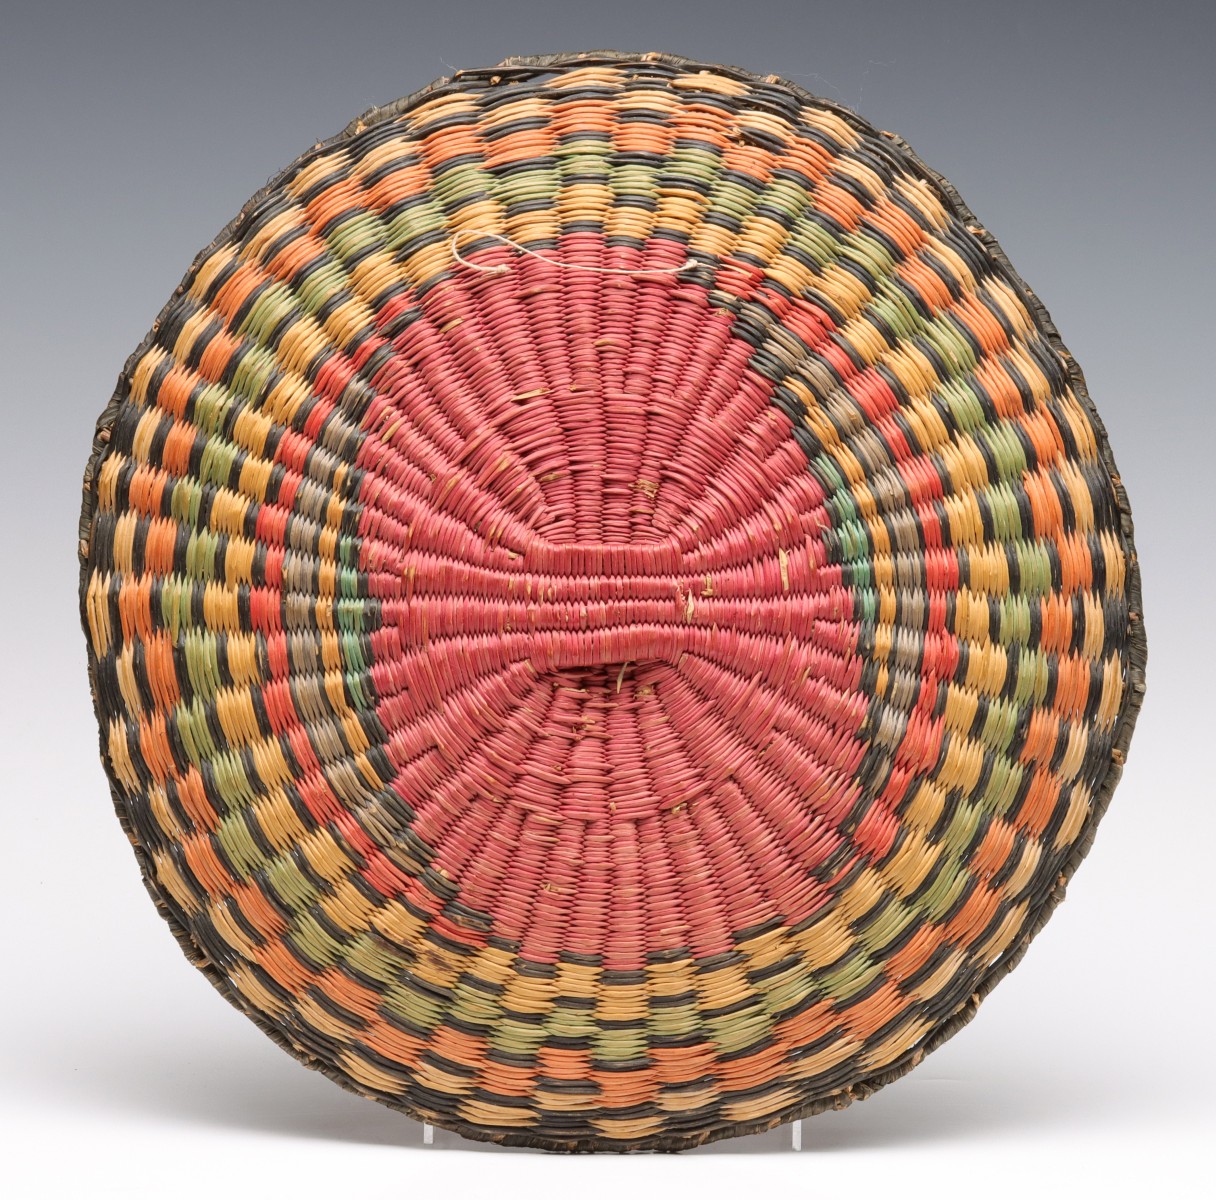 A BRIGHTLY COLORED HOPI WICKER BASKETRY TRAY C. 1930